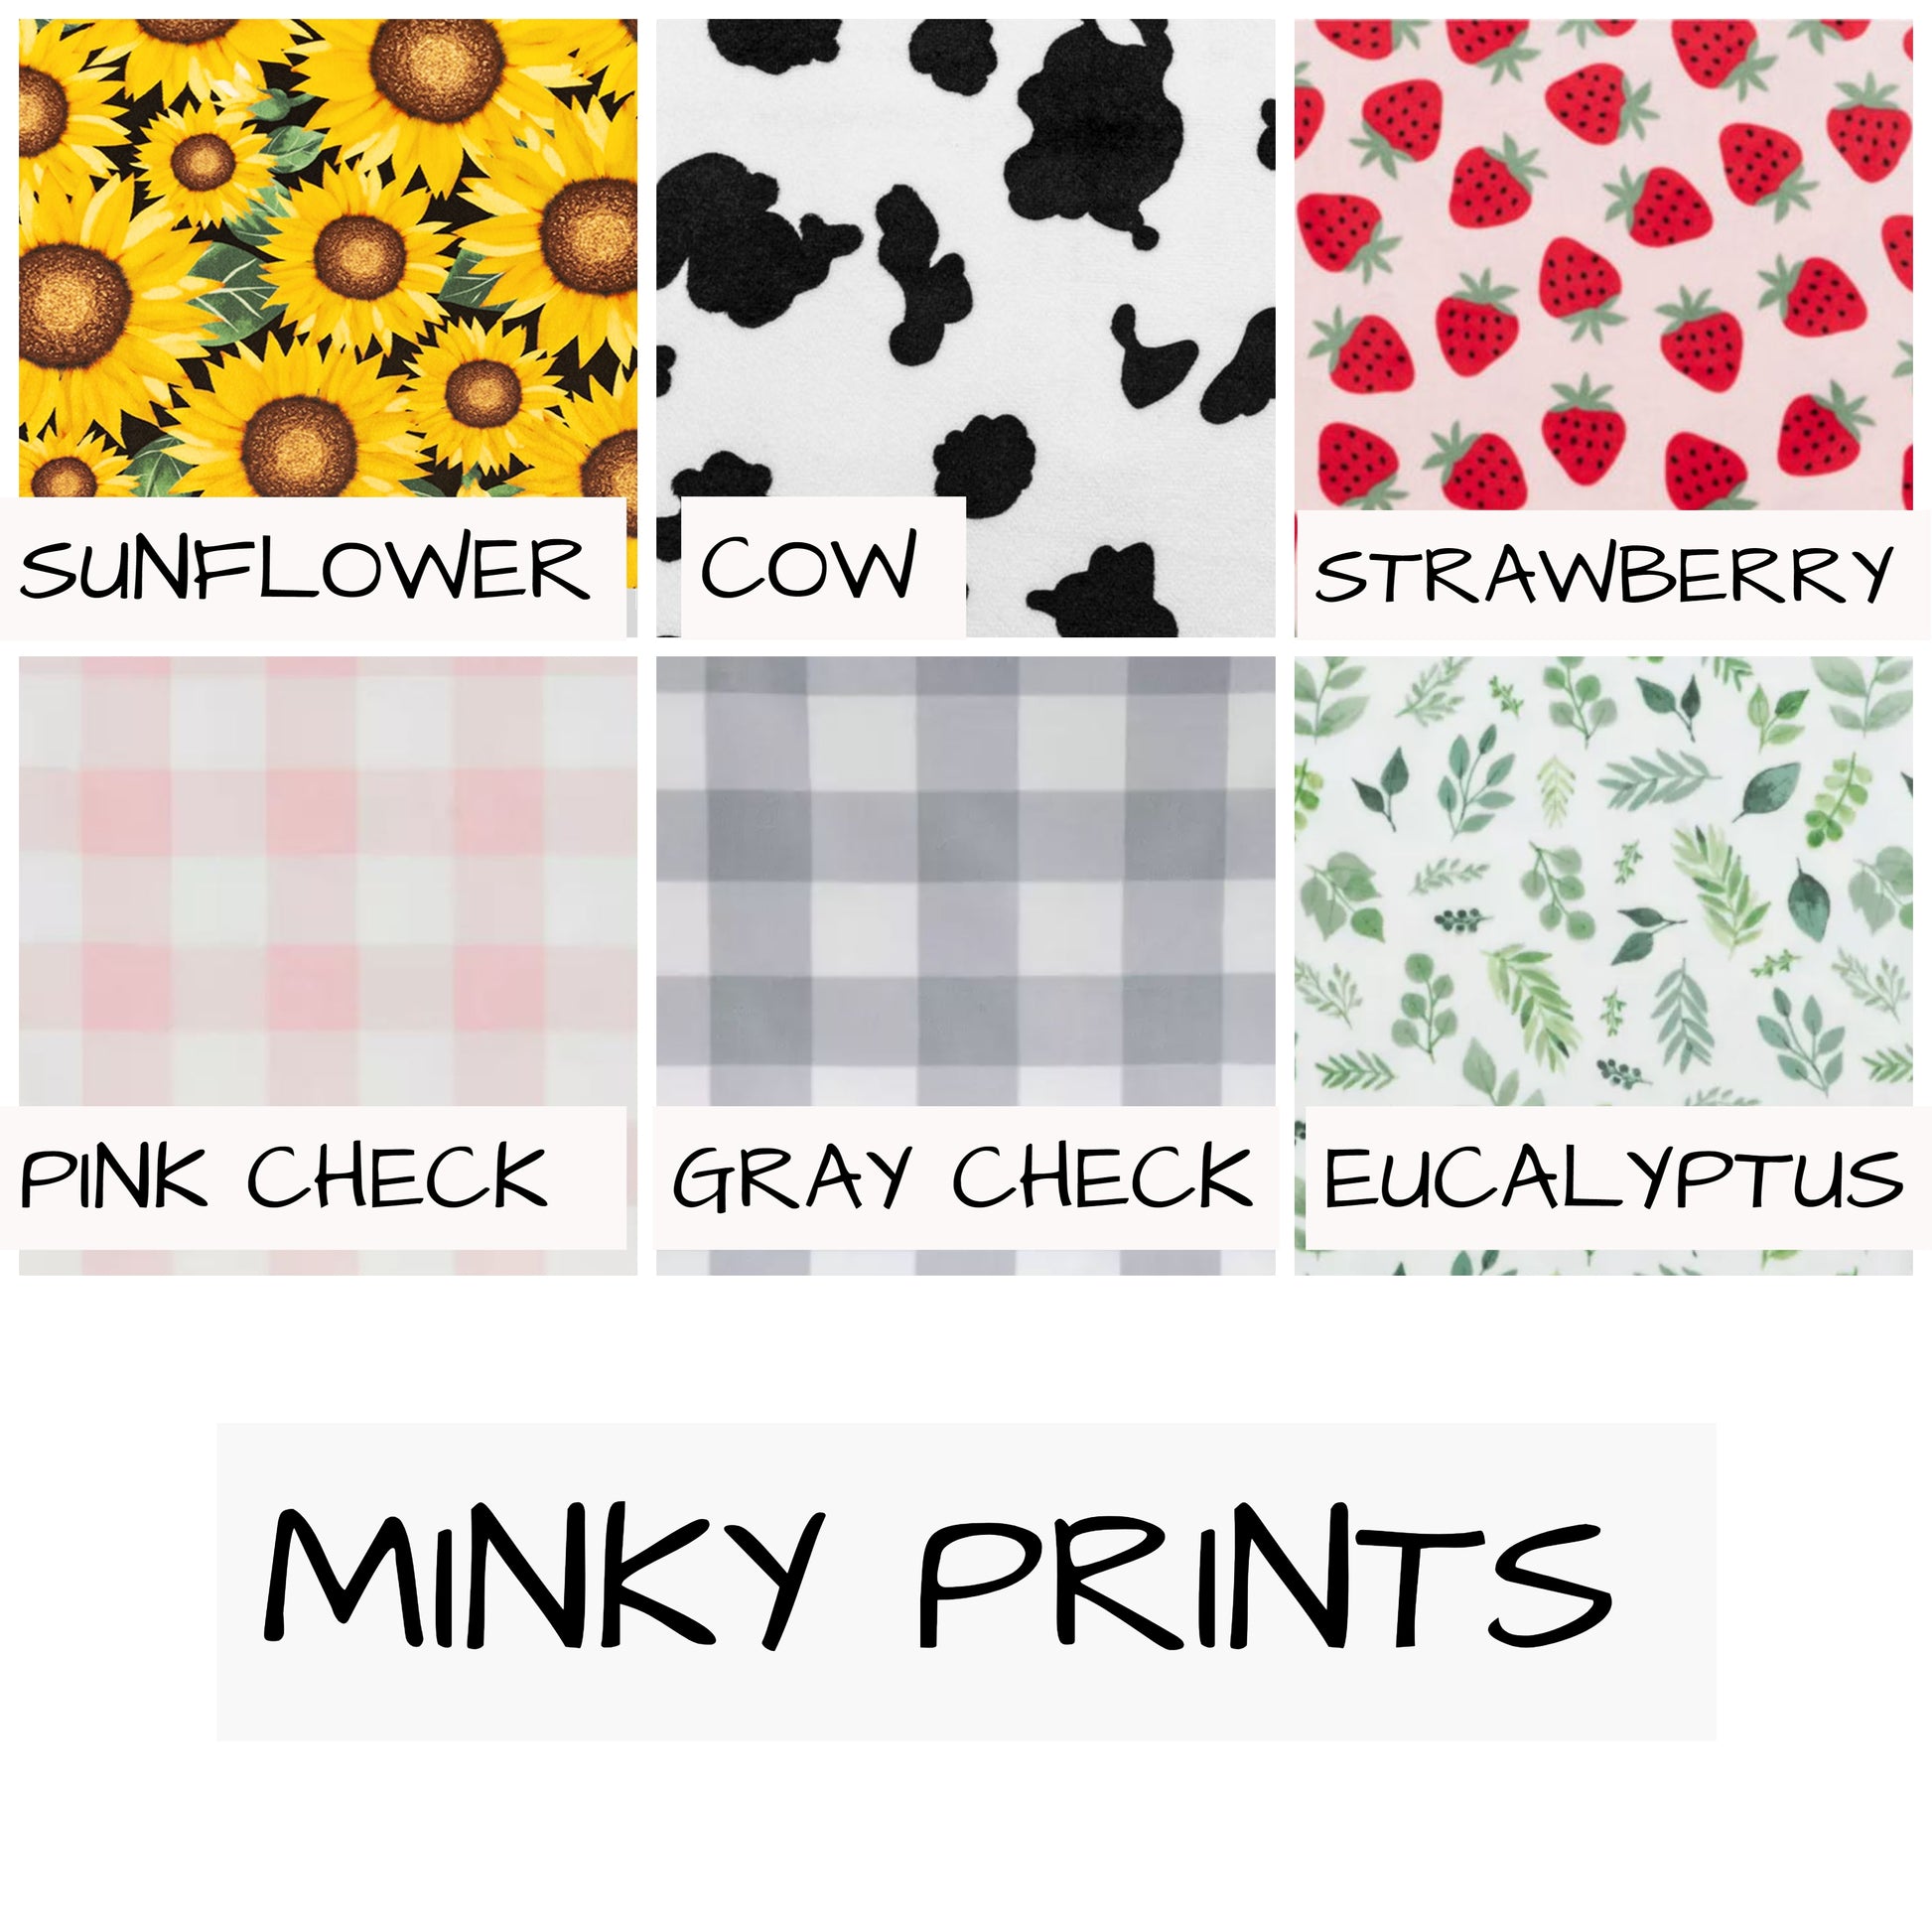 minky prints available for the pillow